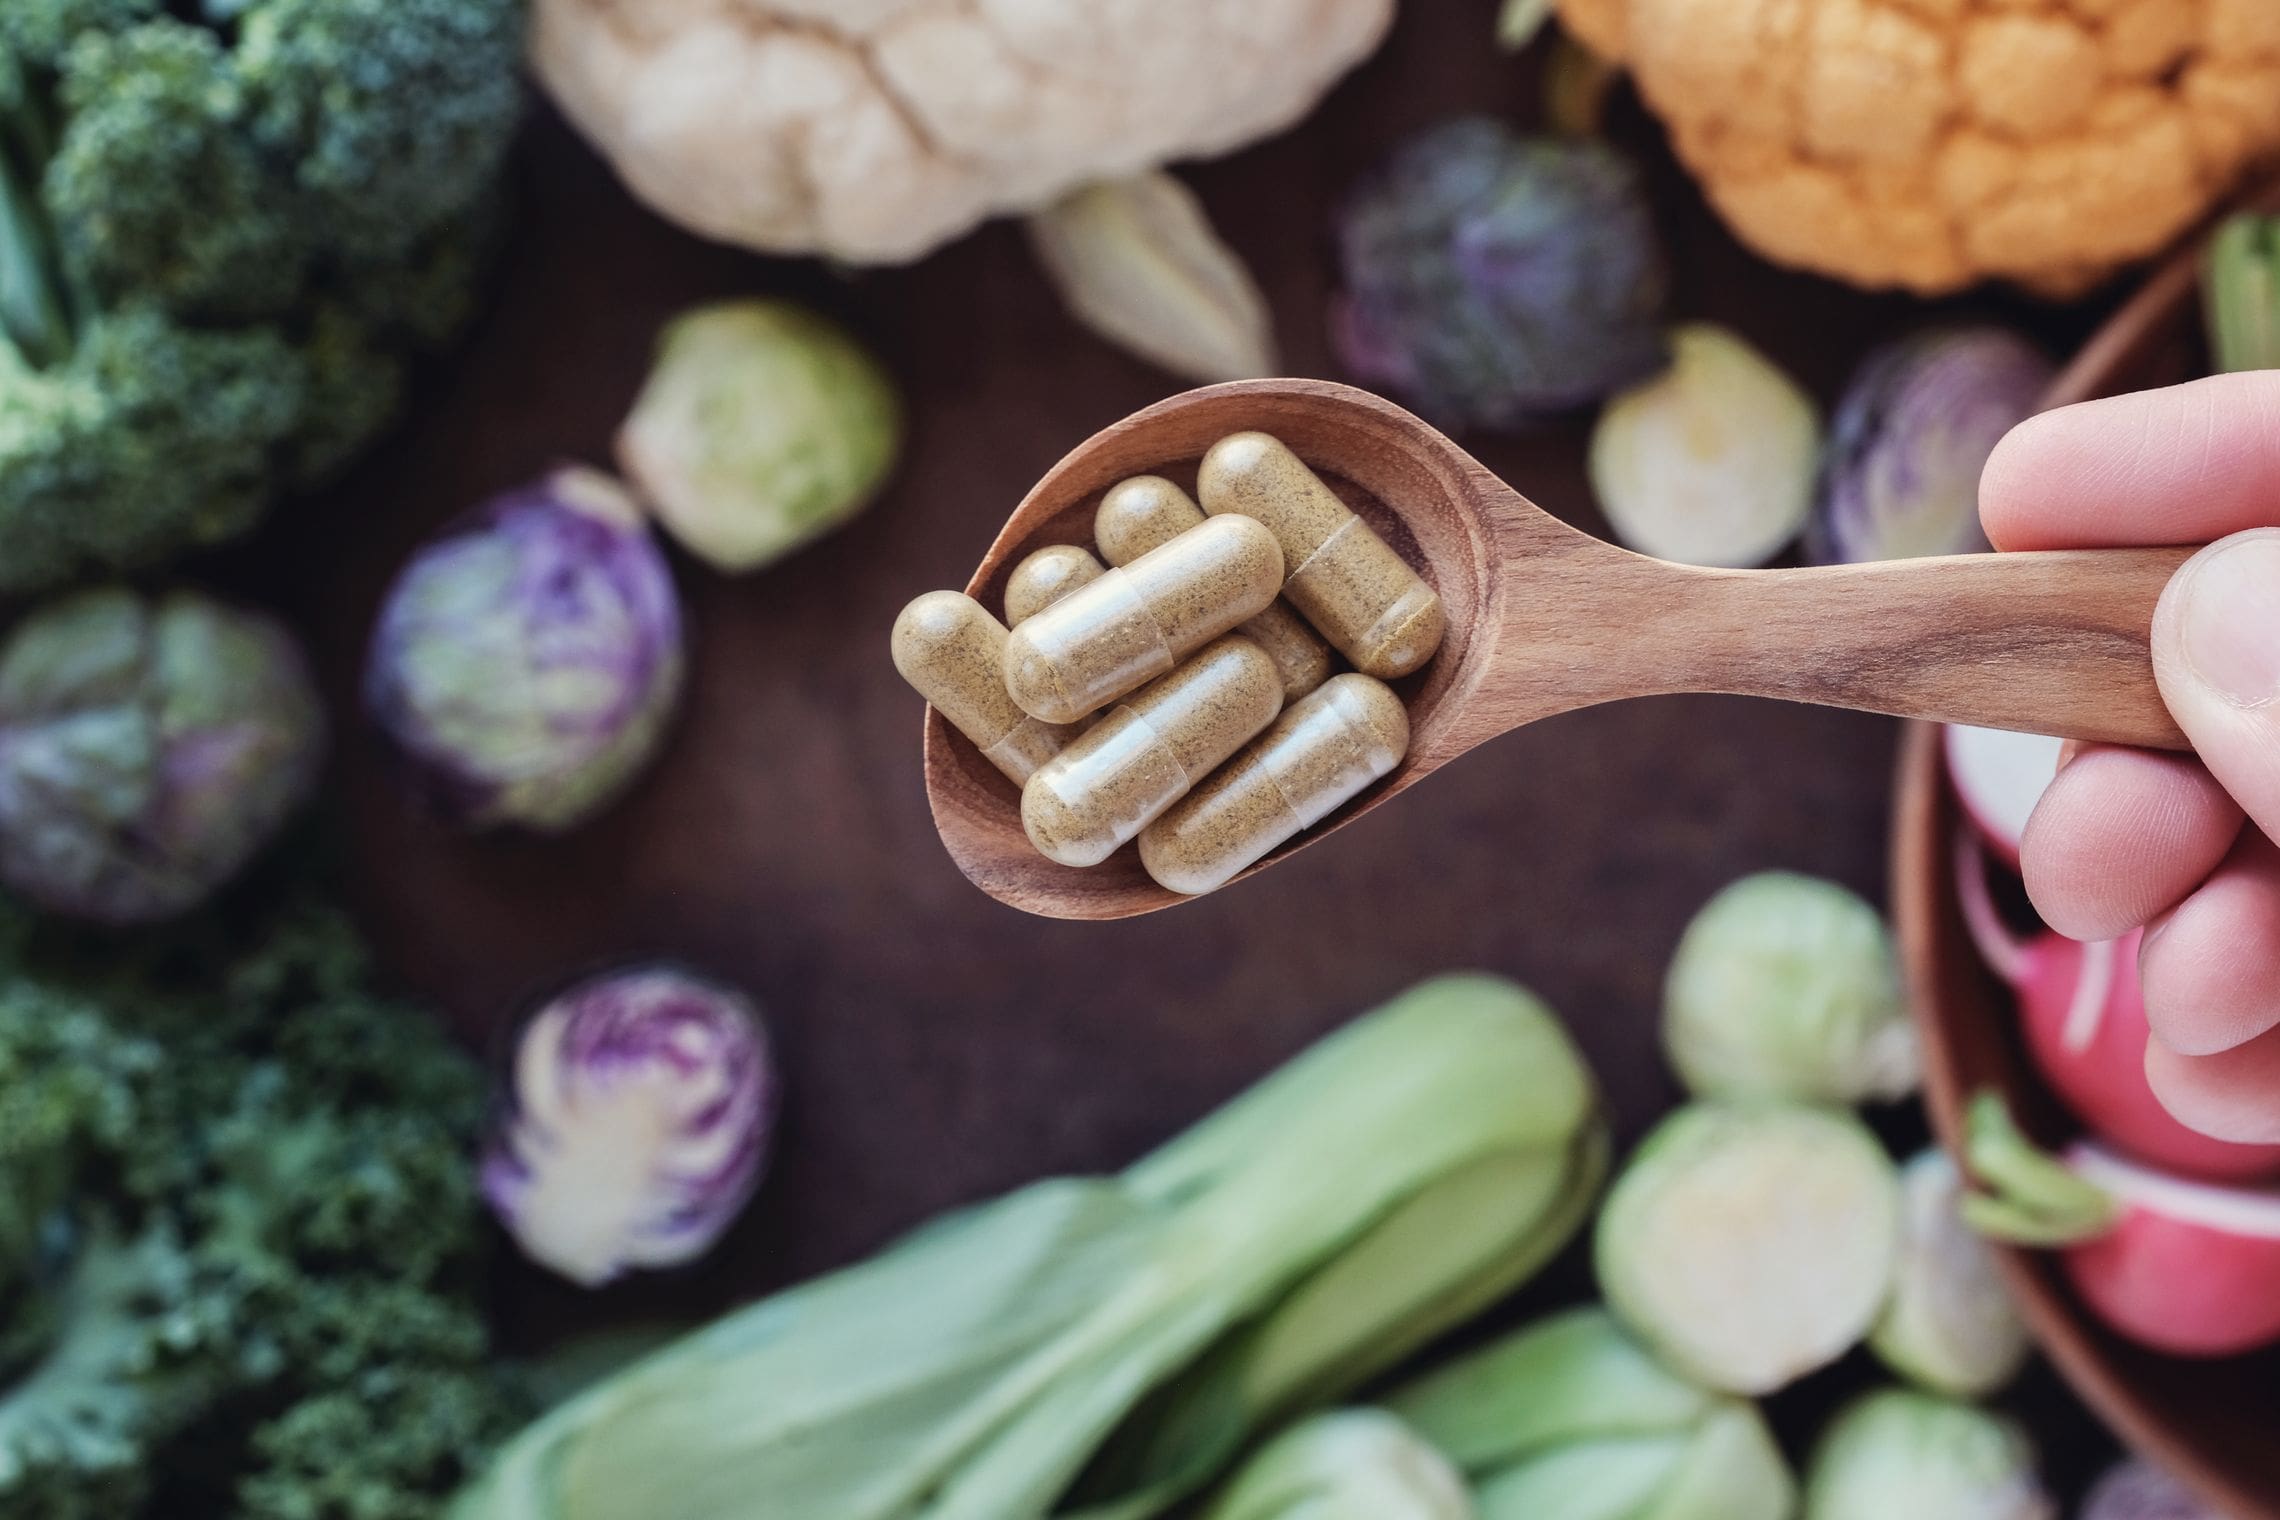 Some dietary supplements may disappoint you